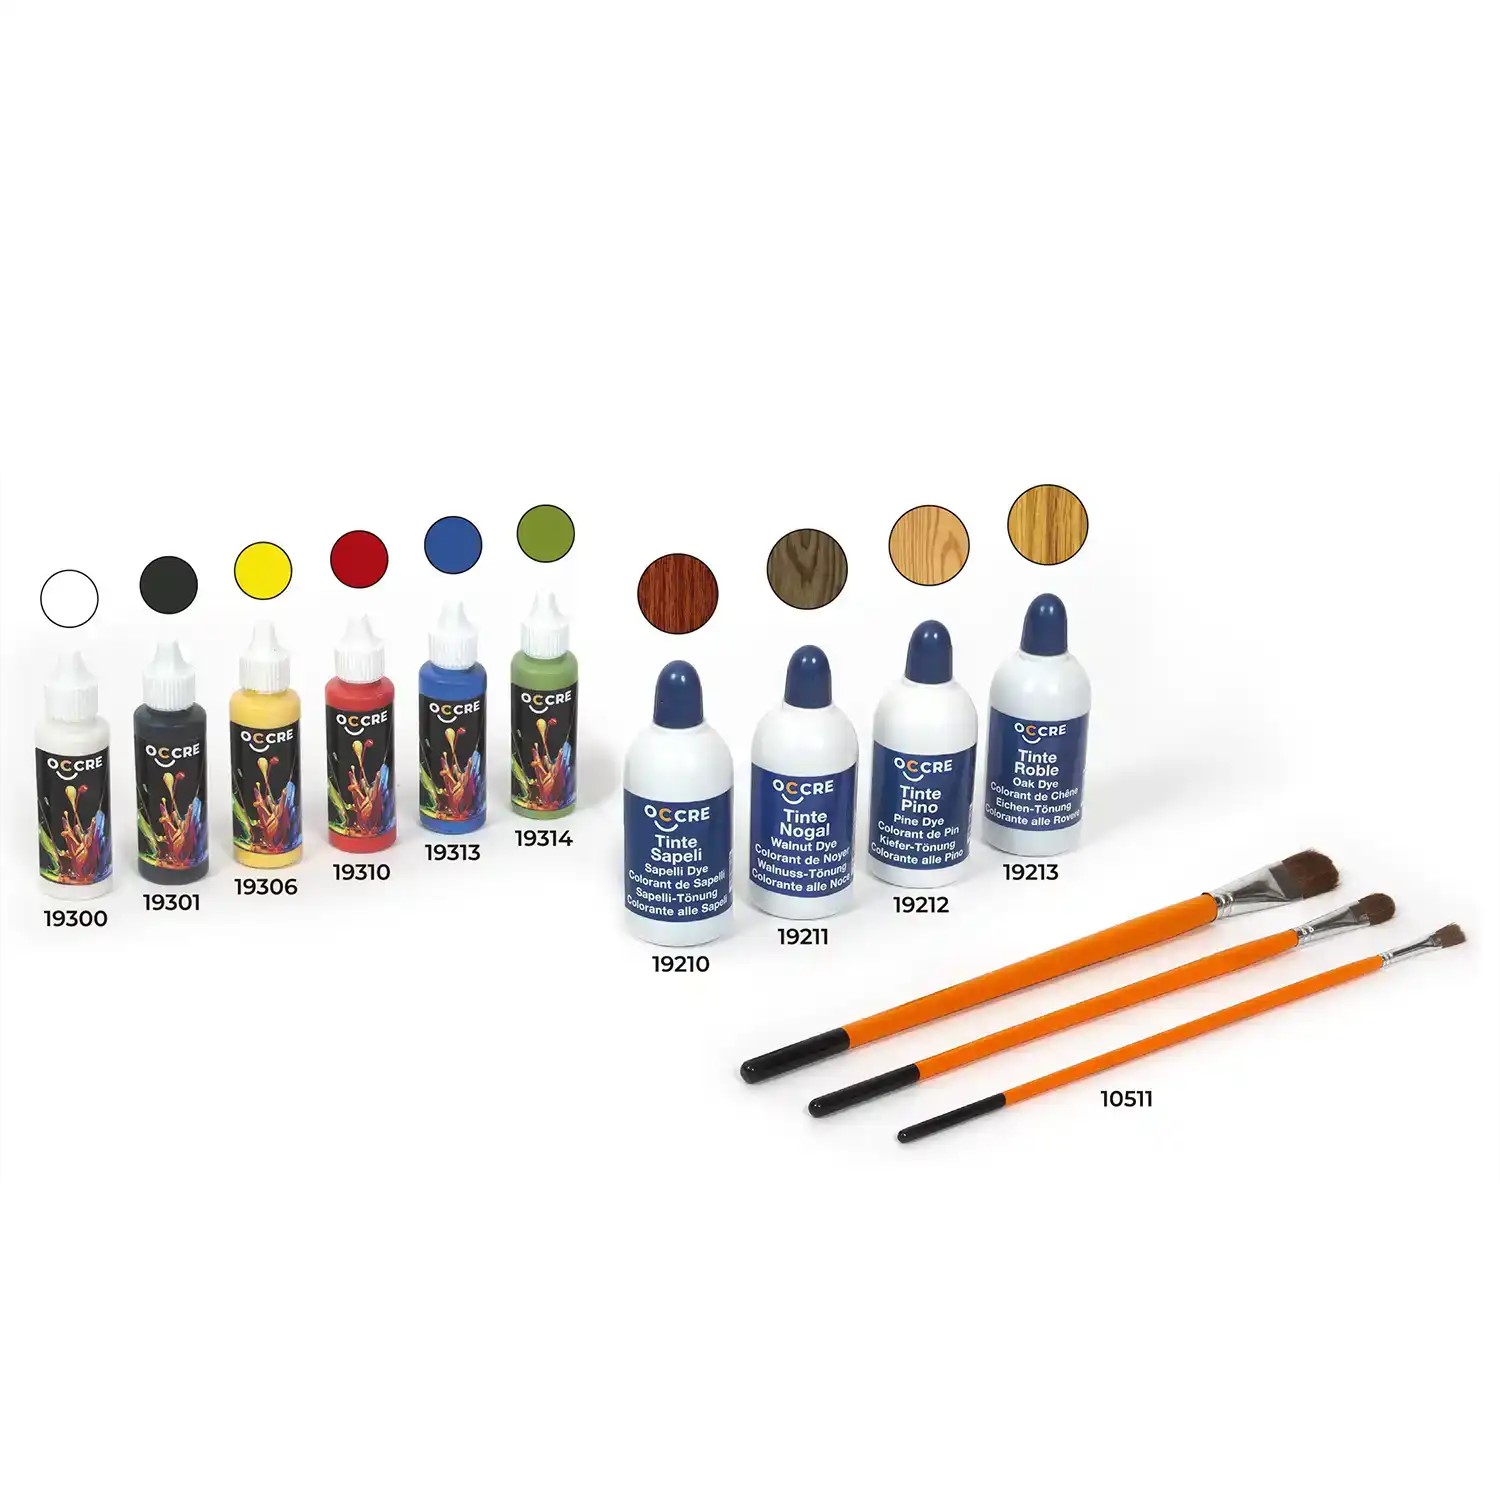 Water Based Basic paints, dye pack and brushes (90547)